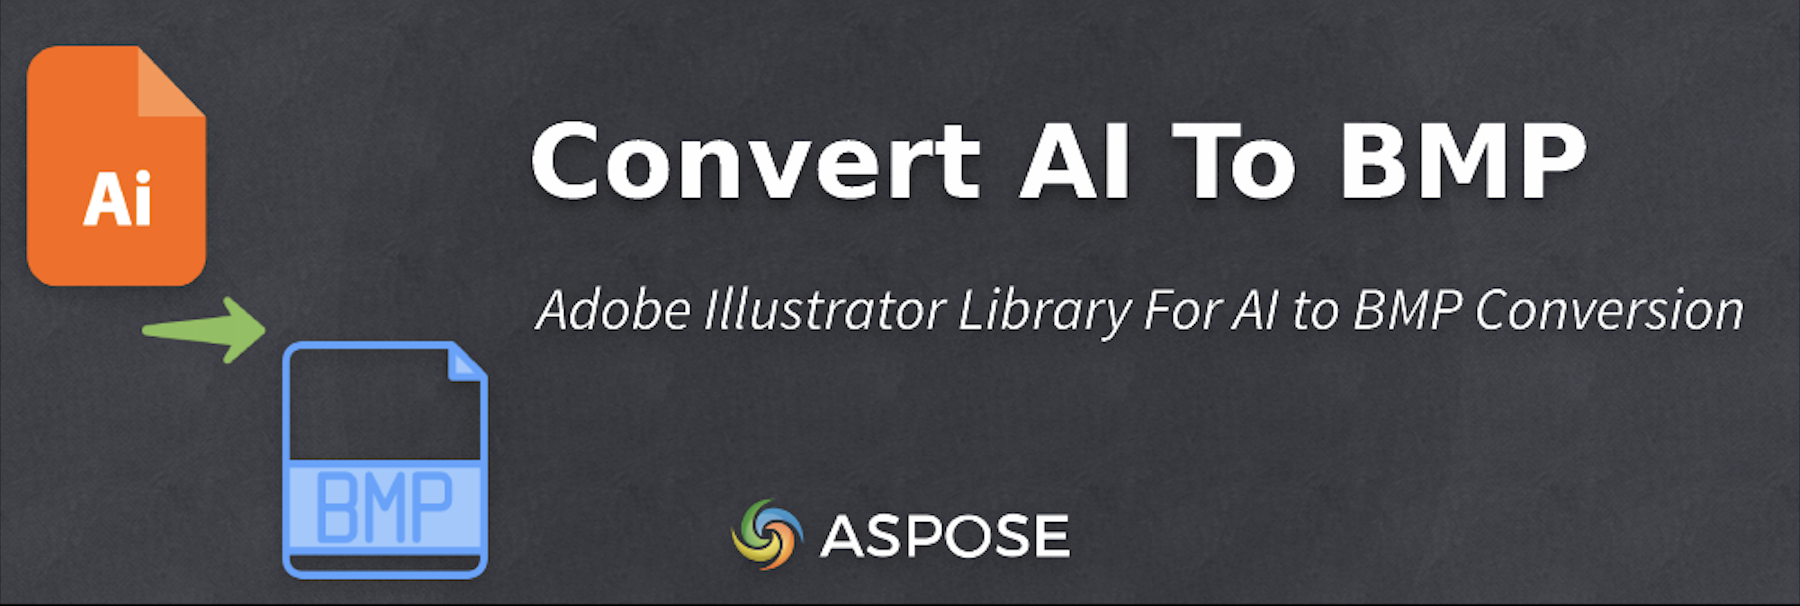 Convert AI to BMP in Java - Adobe Illustrator Library